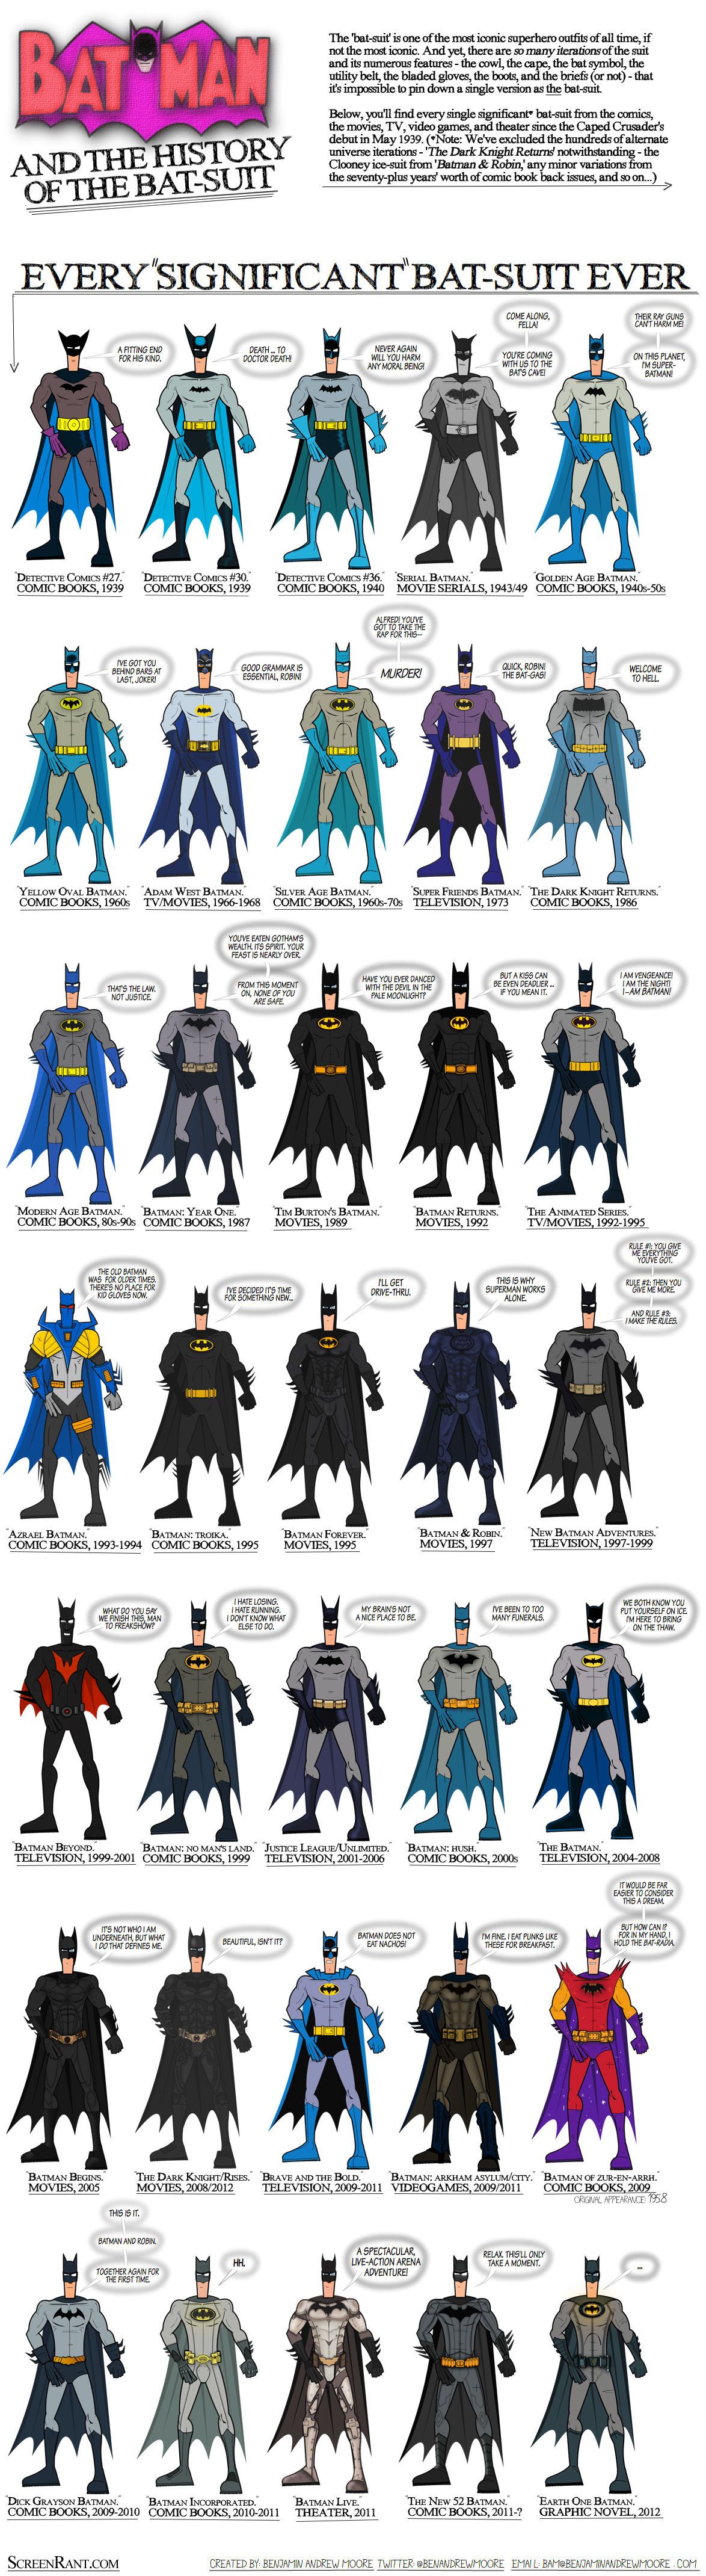 Batman and the History of the Bat-Suit Infographic